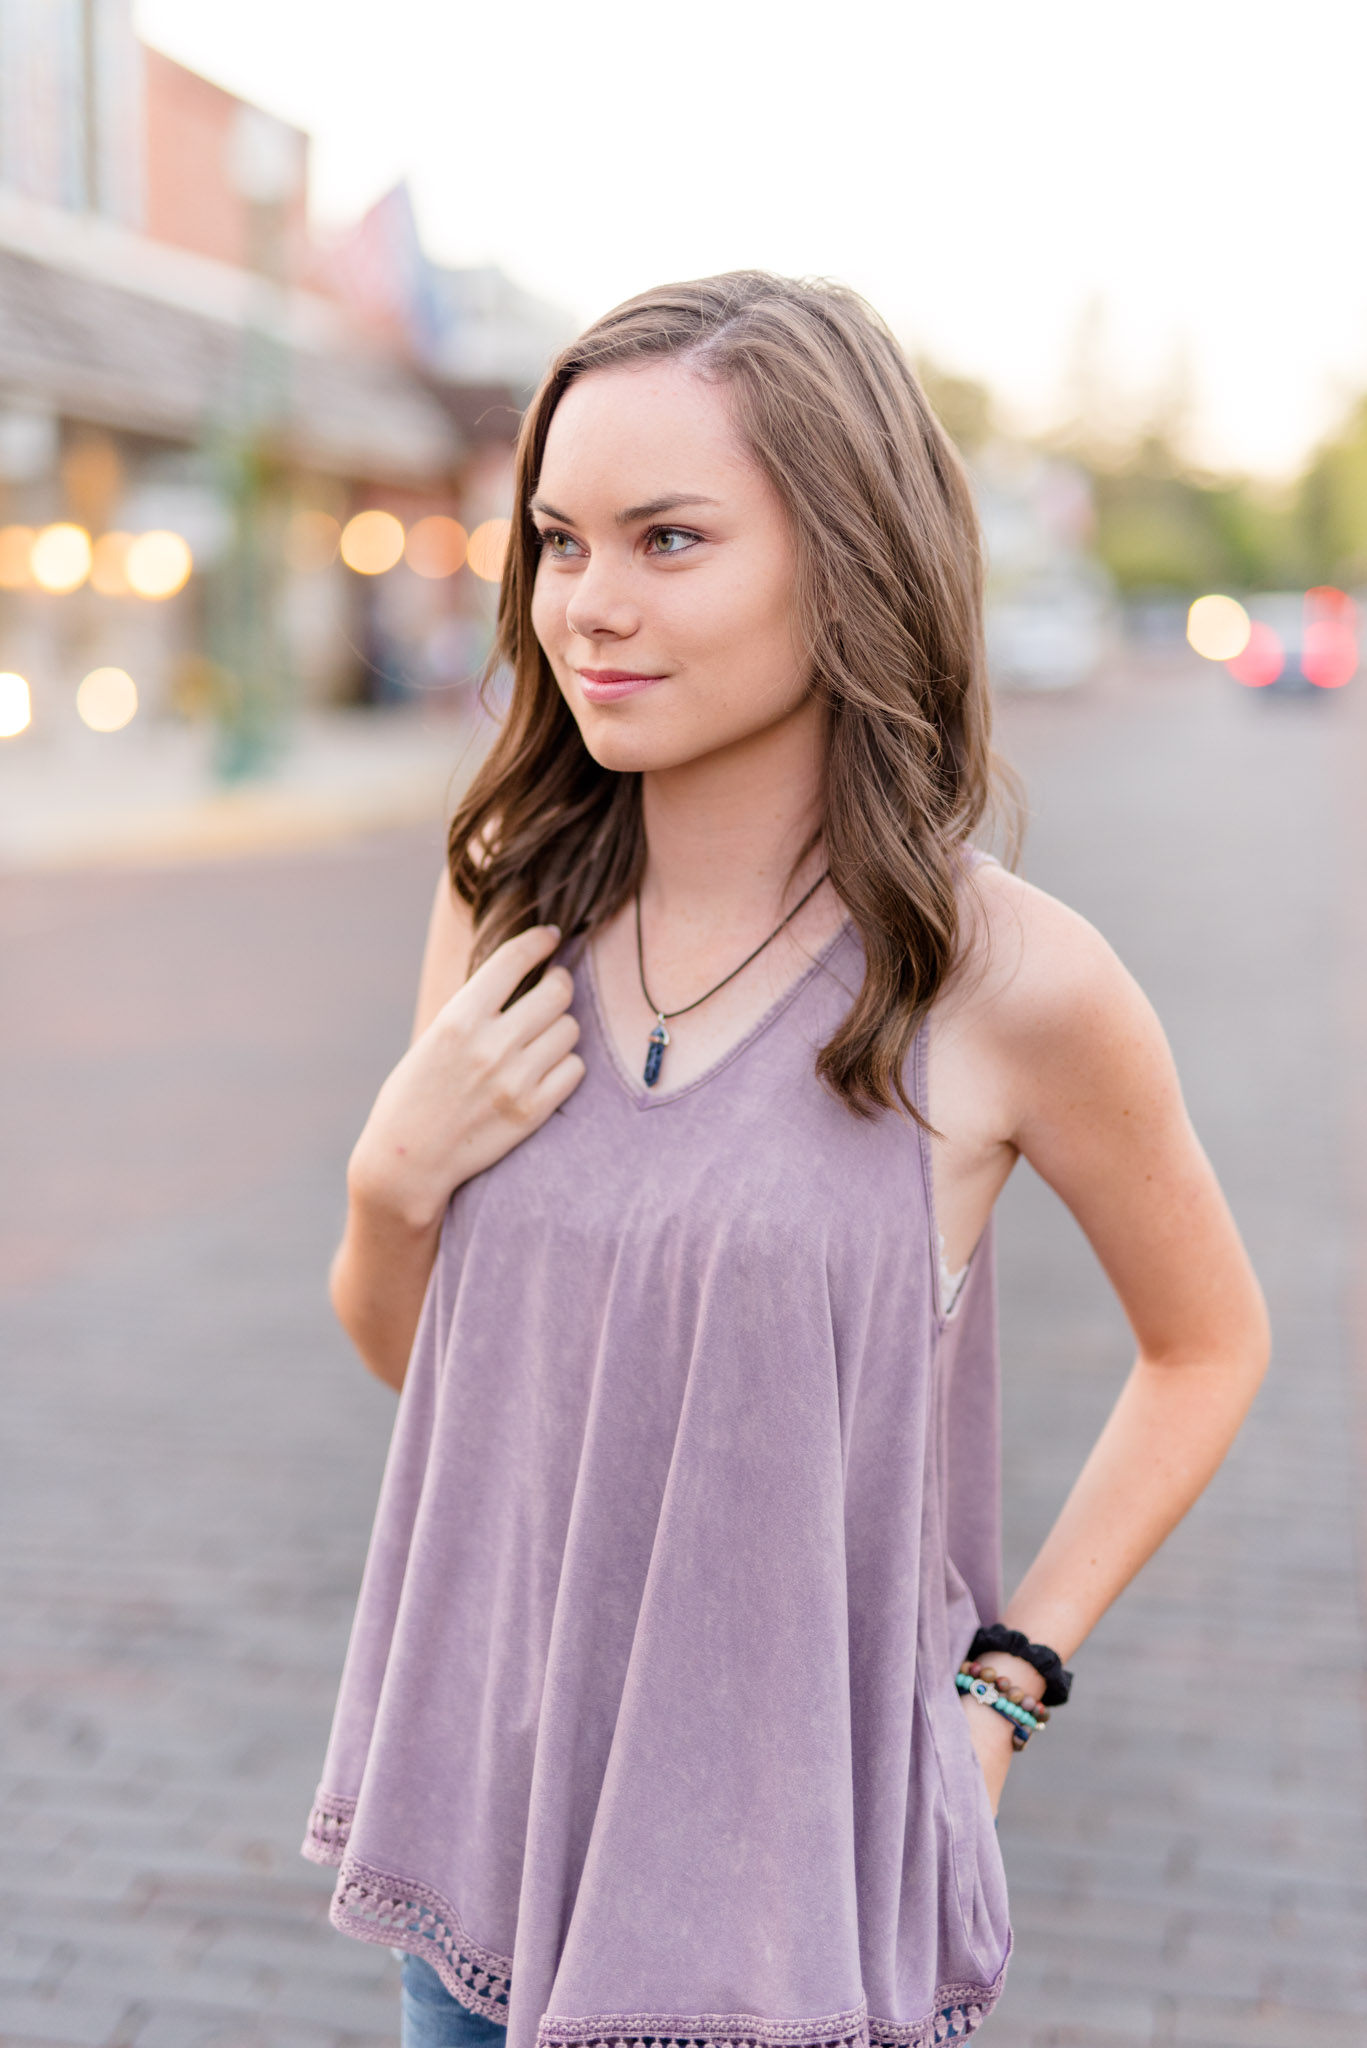 Senior girl looks off camera in downtown setting.